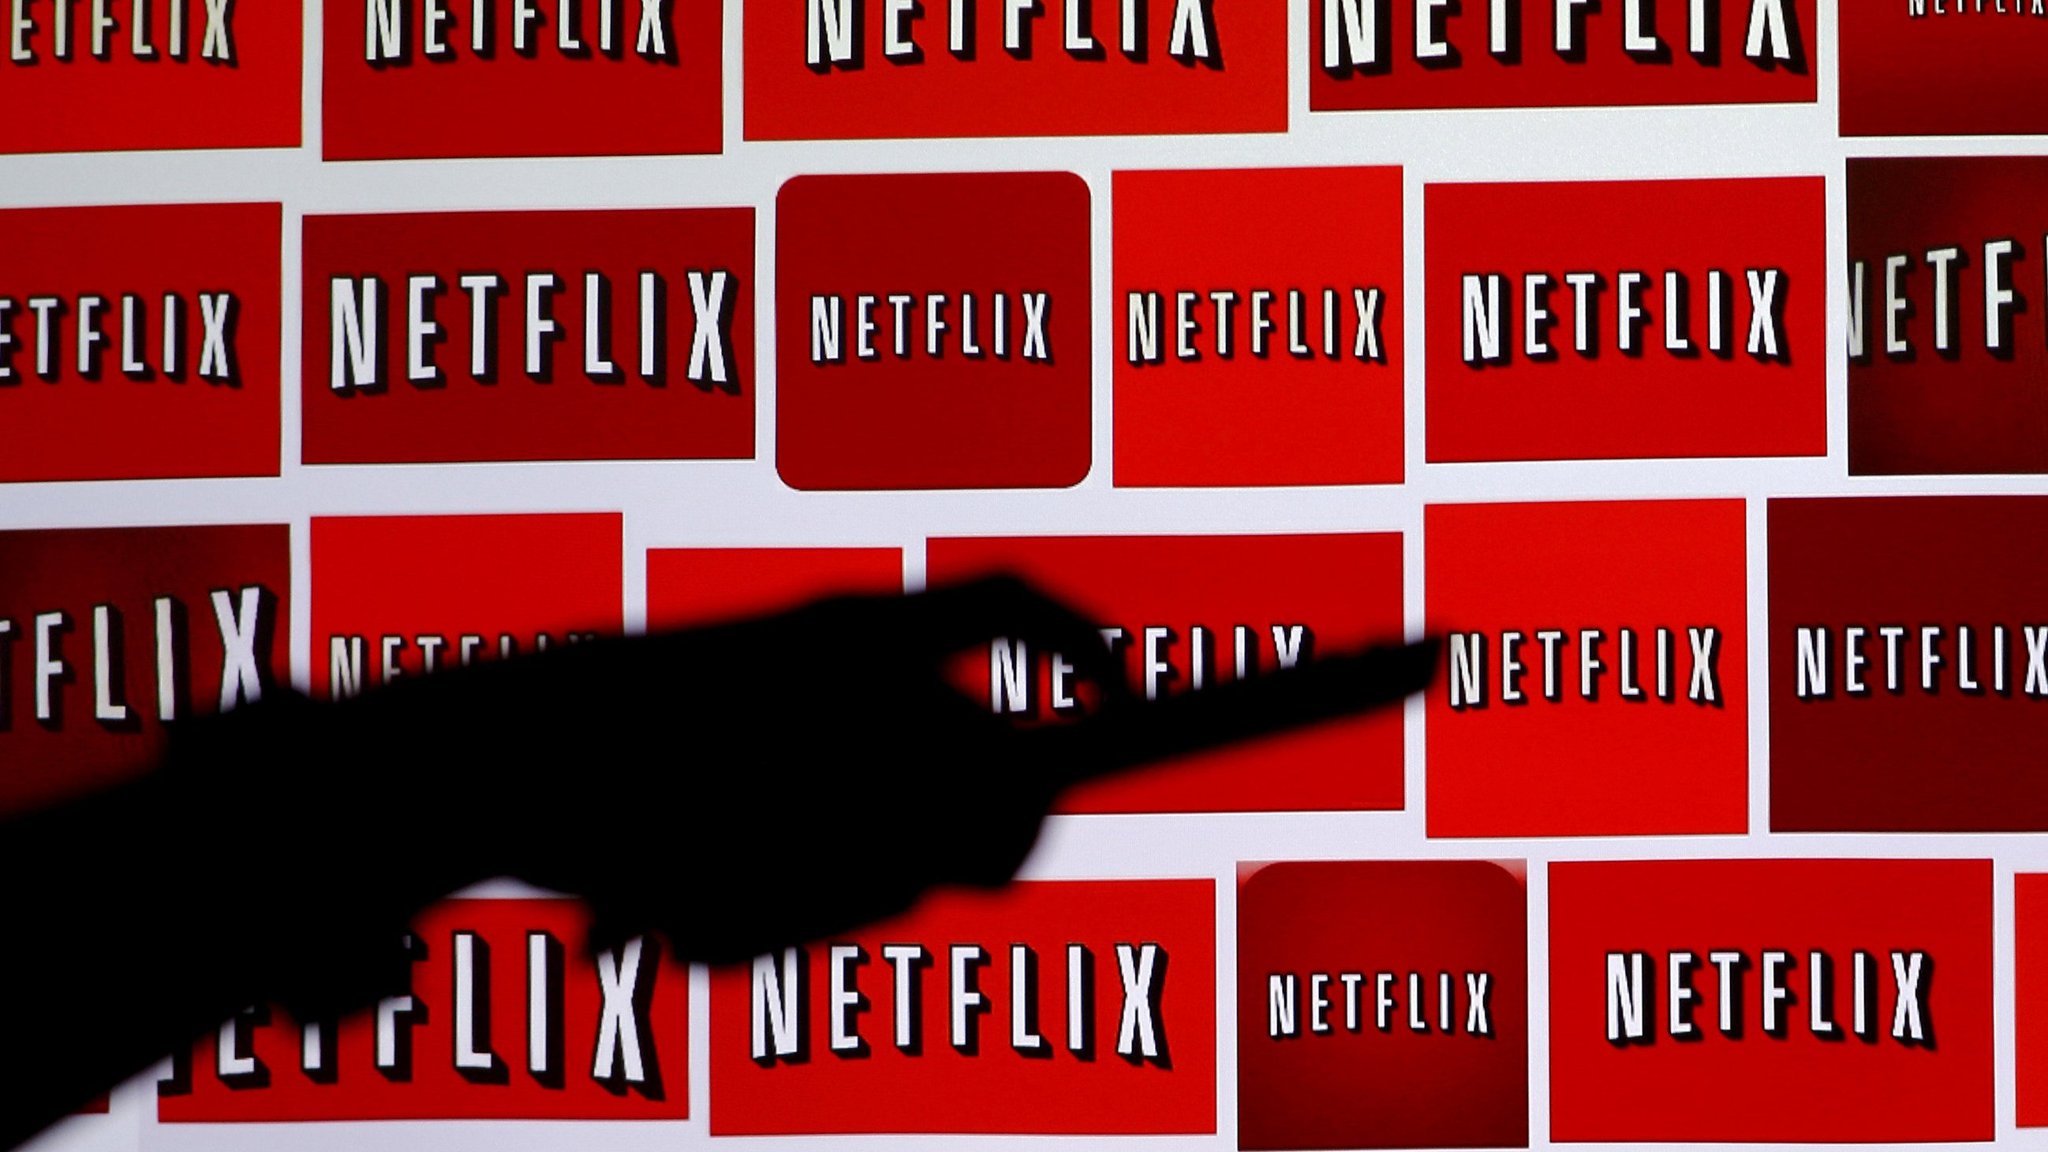 Netflix is said to have poached CFO from Activision Blizzard